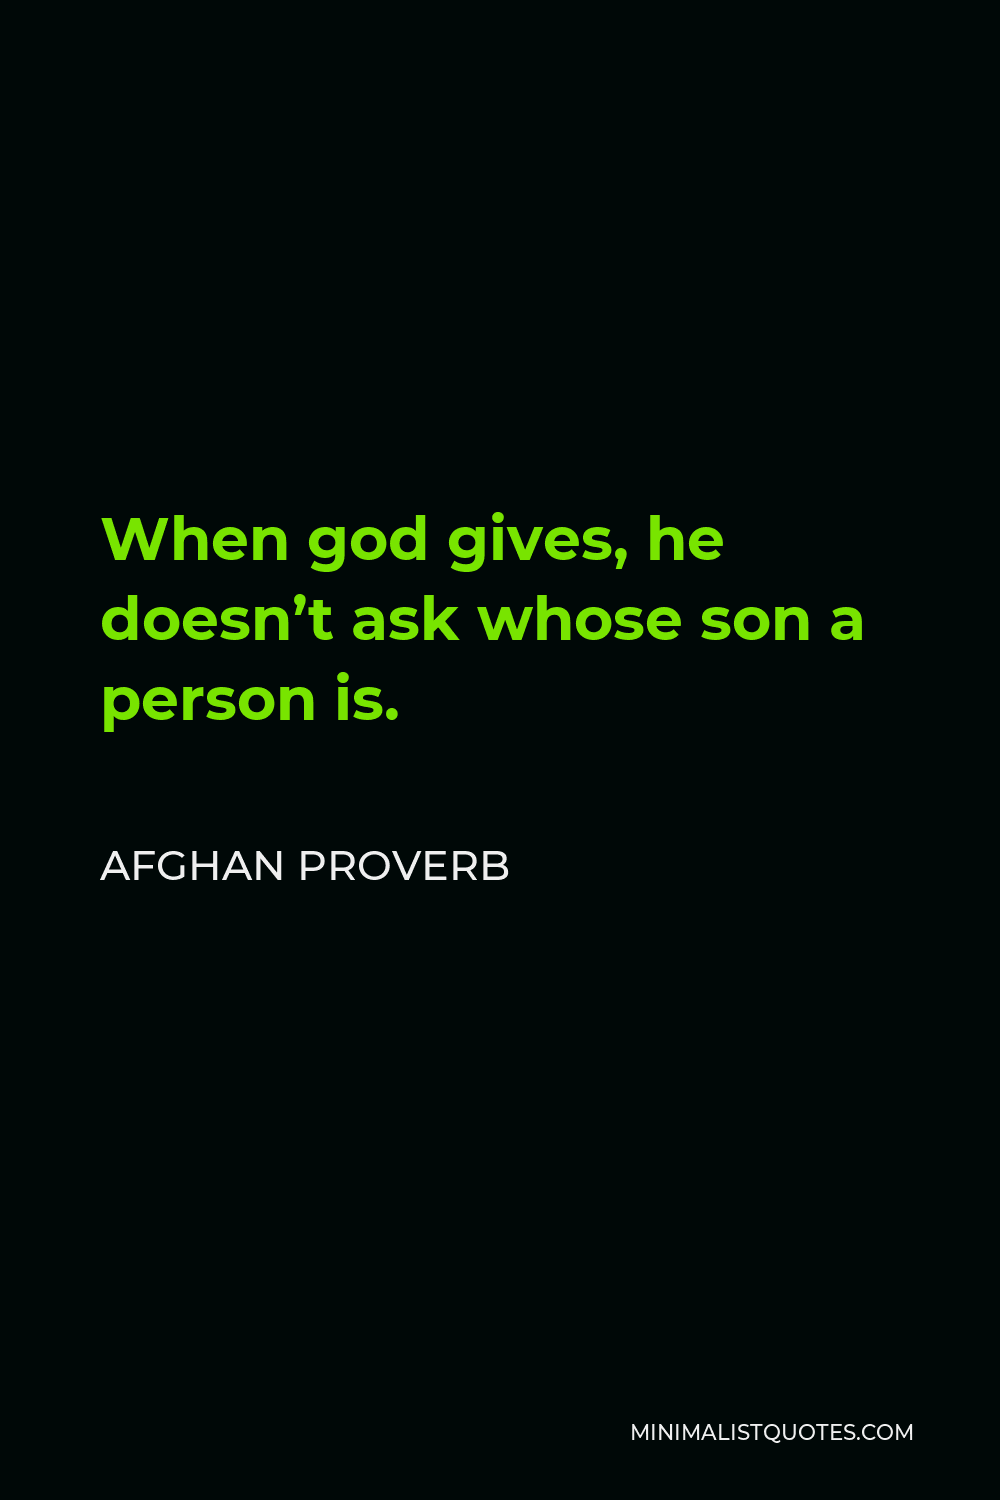 Afghan Proverb Quote - When god gives, he doesn’t ask whose son a person is.